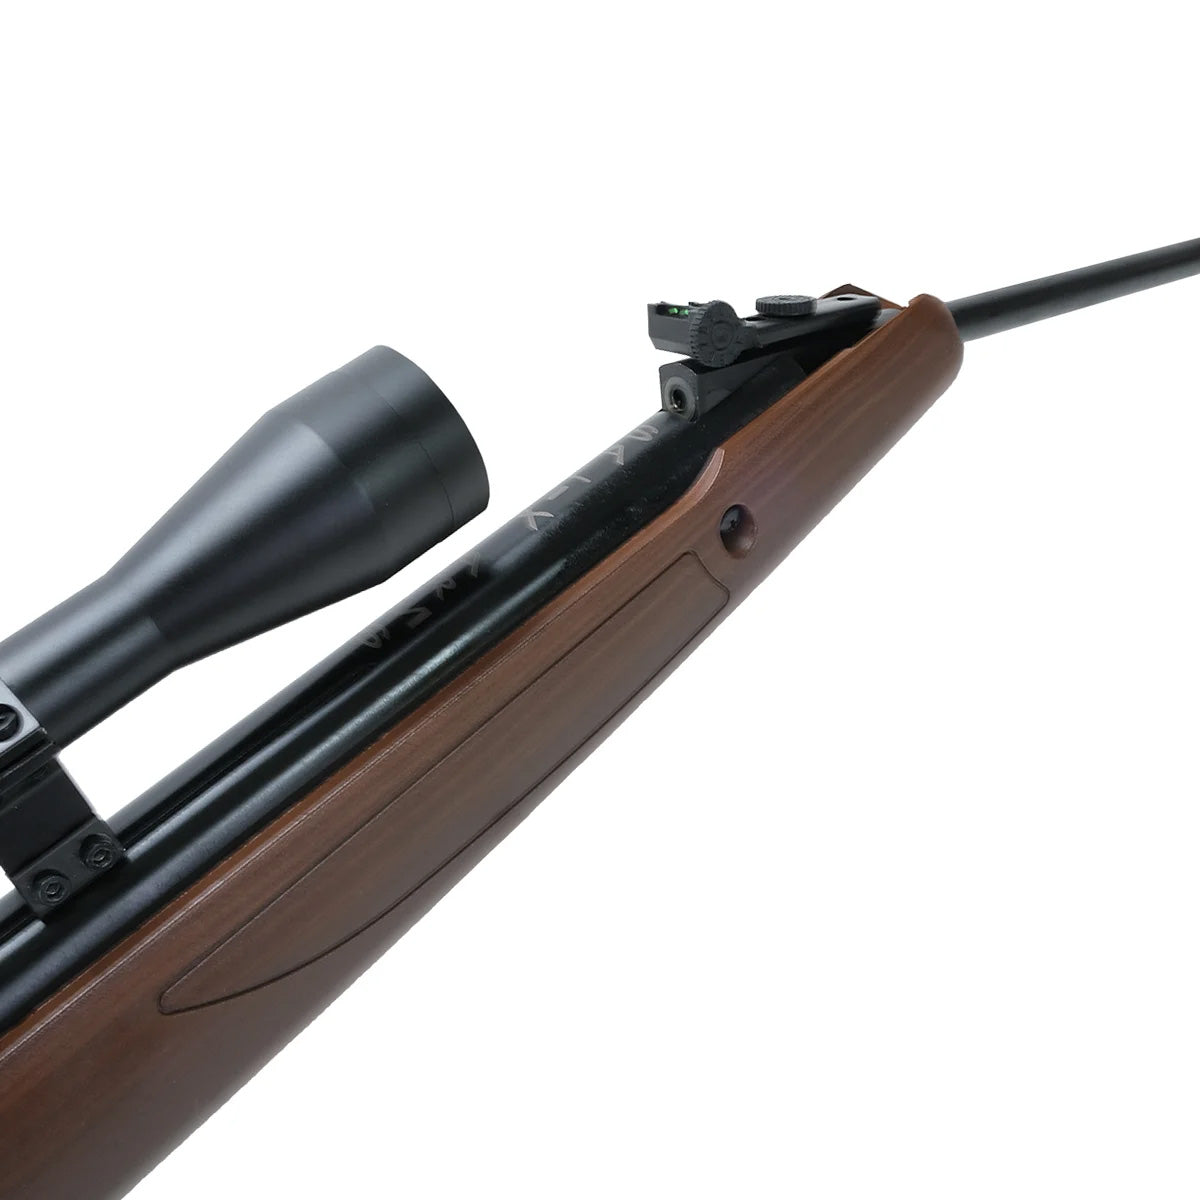 SALIX, TRIMEX ARMS TX02 BREAK BARREL SPRING AIR RIFLE WITH SYNTHETIC WOOD LOOK STOCK .22